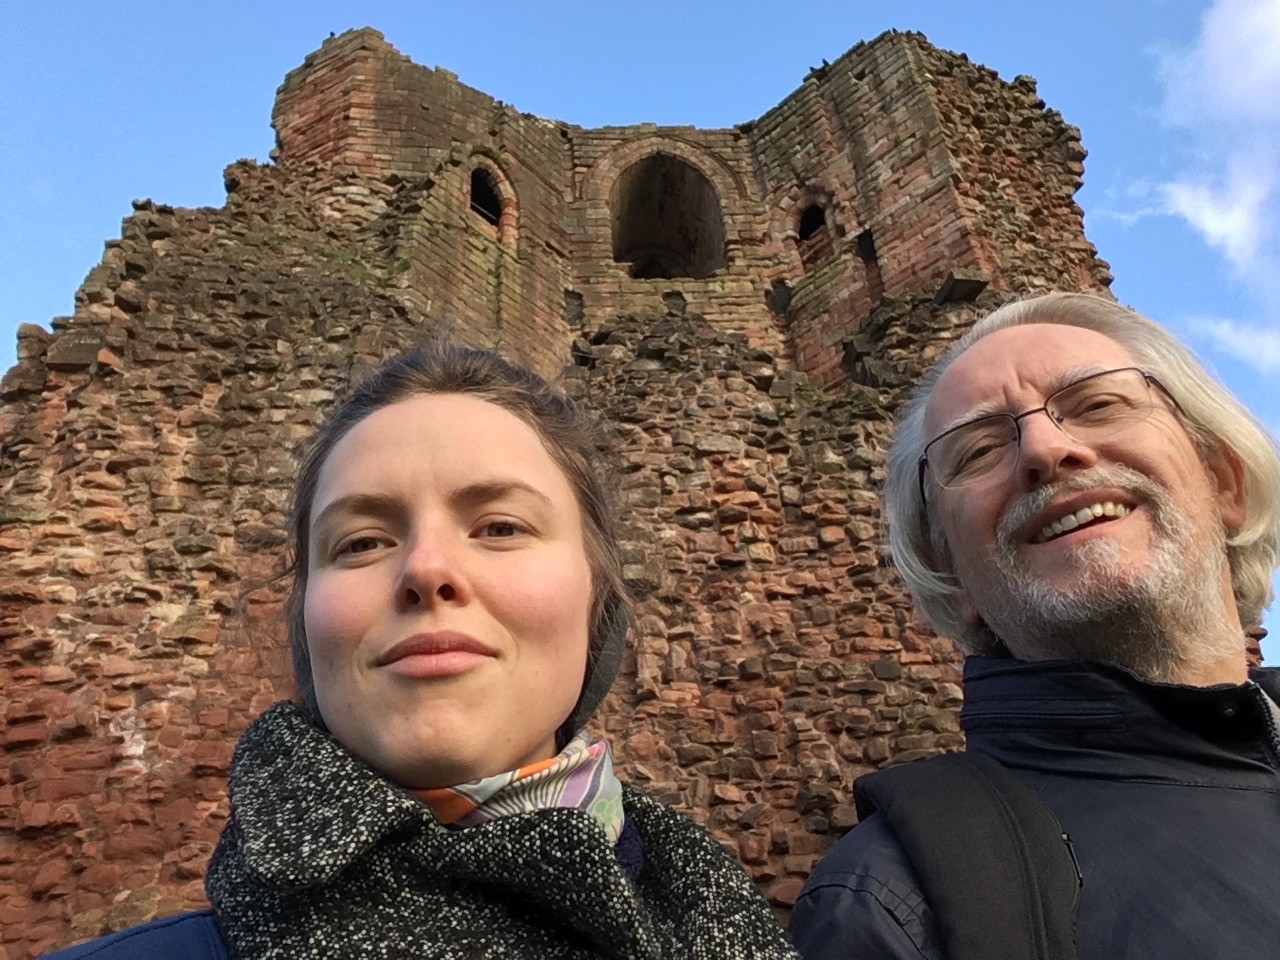 My dad and I at Bothwell Castle on the Clyde in Scotland